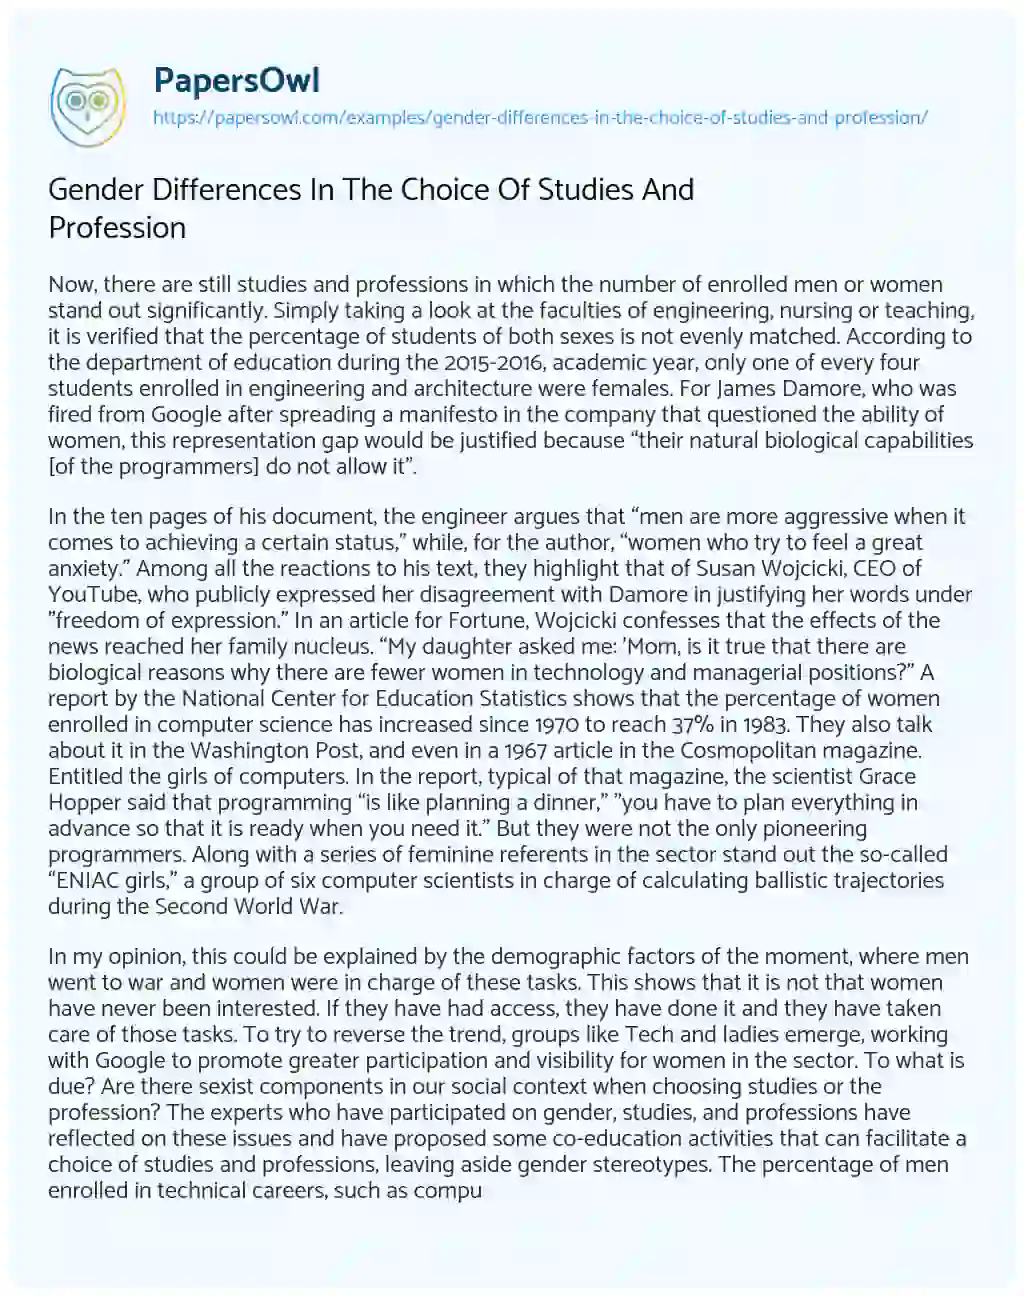 Essay on Gender Differences in the Choice of Studies and Profession